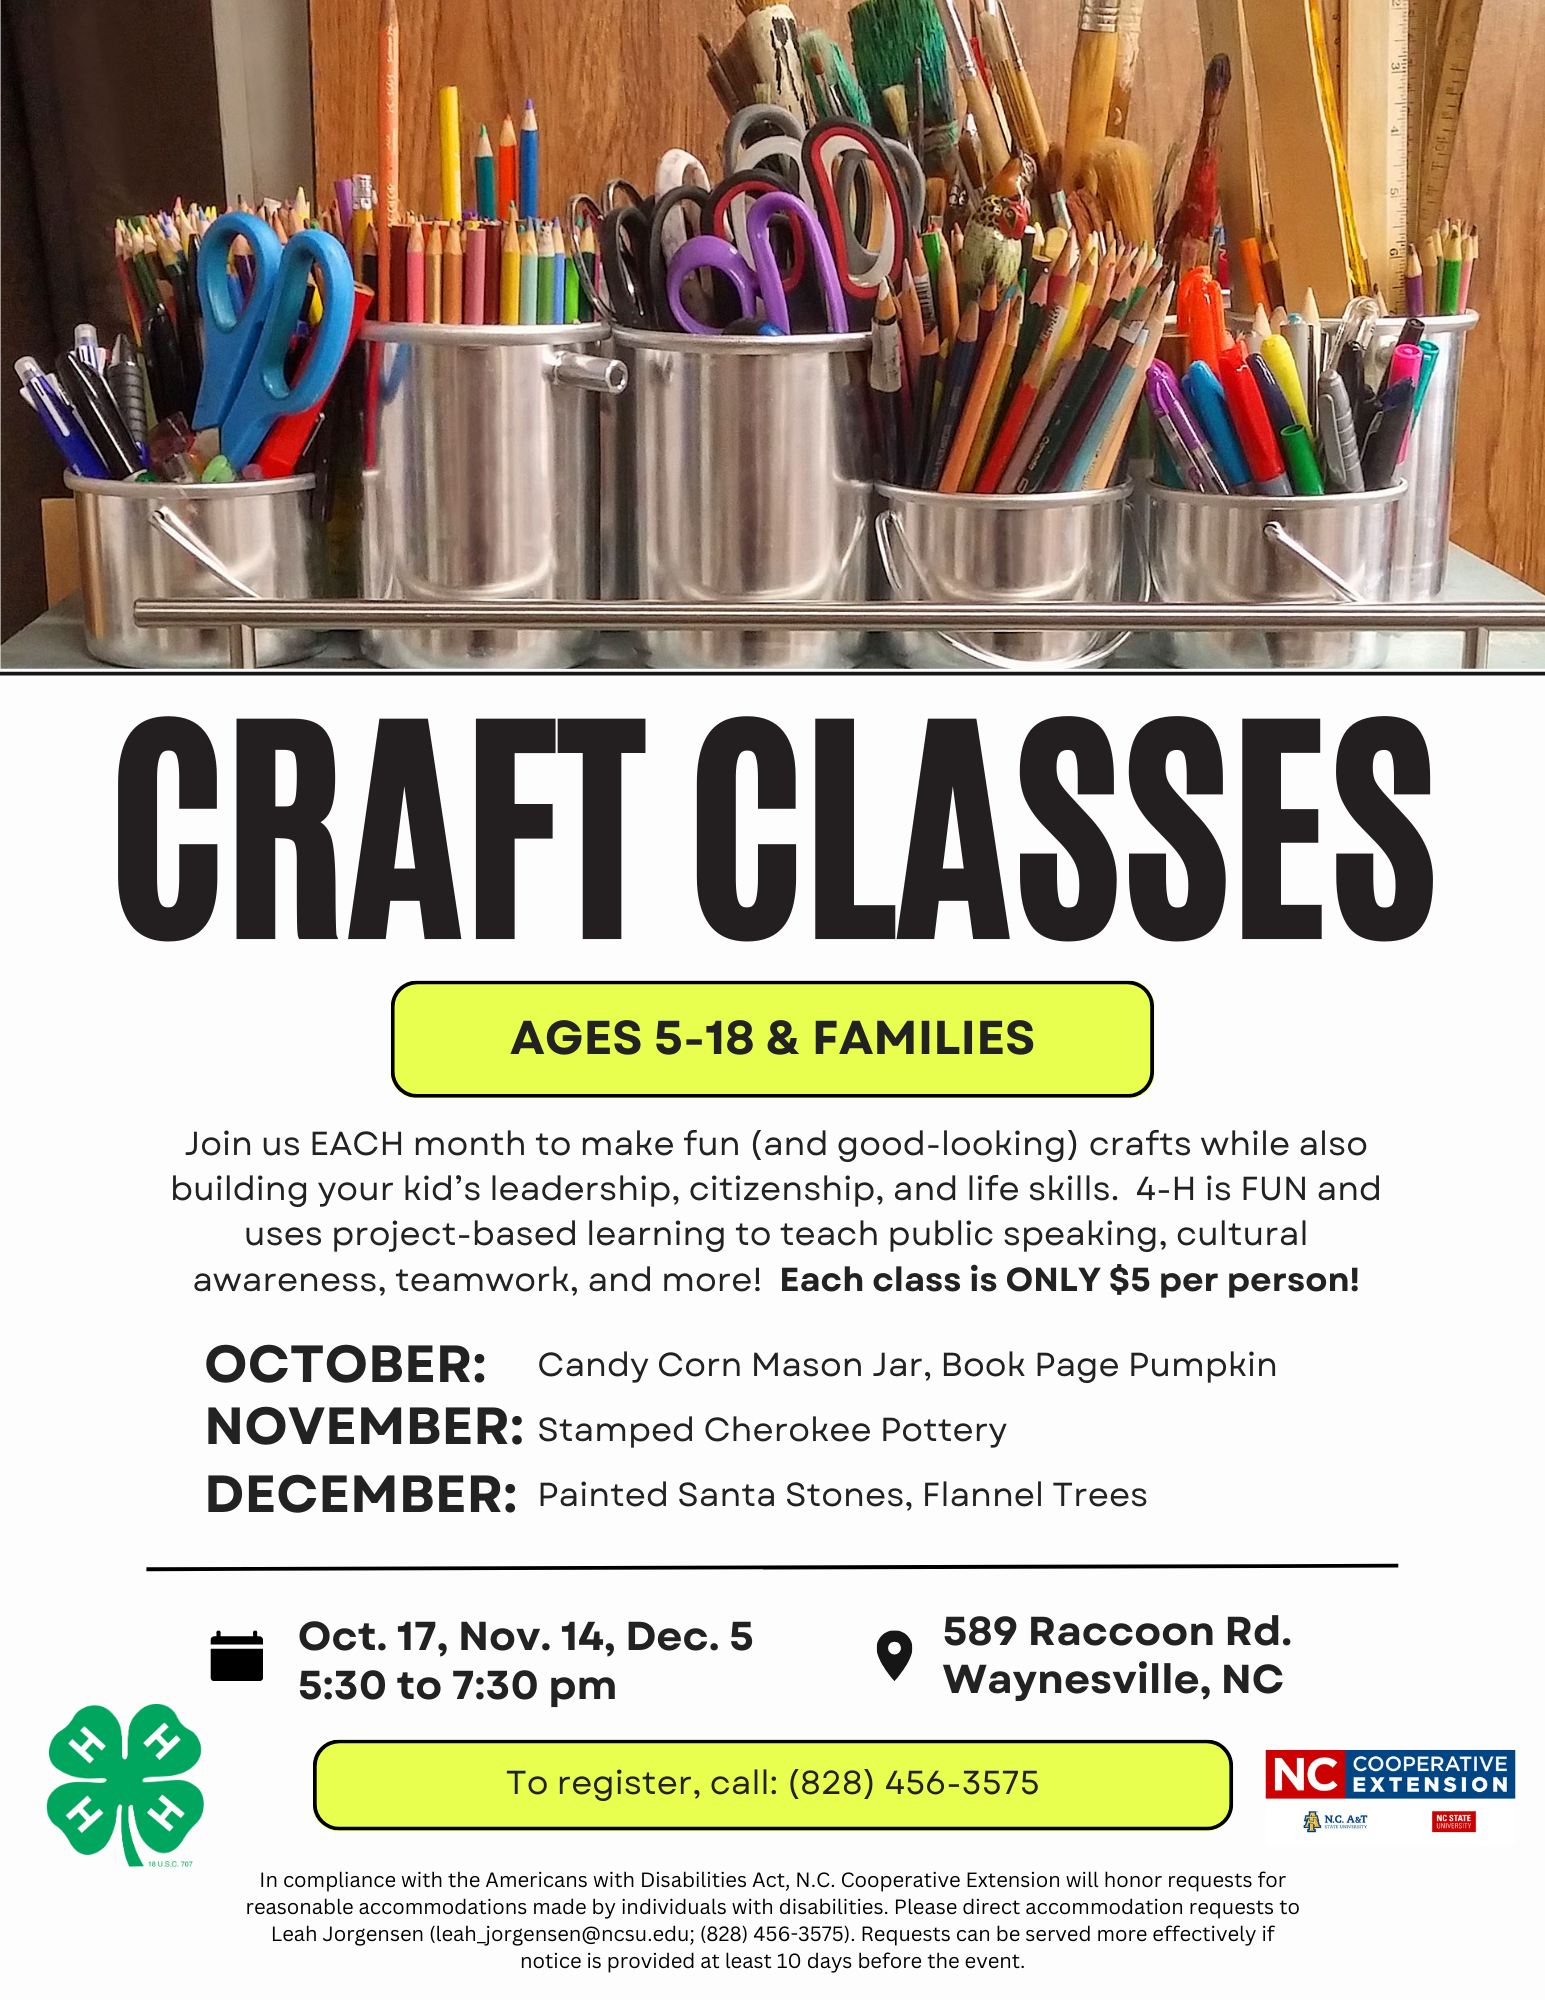 Craft Classes flyer with image of crafting tools like scissors and colored pencils